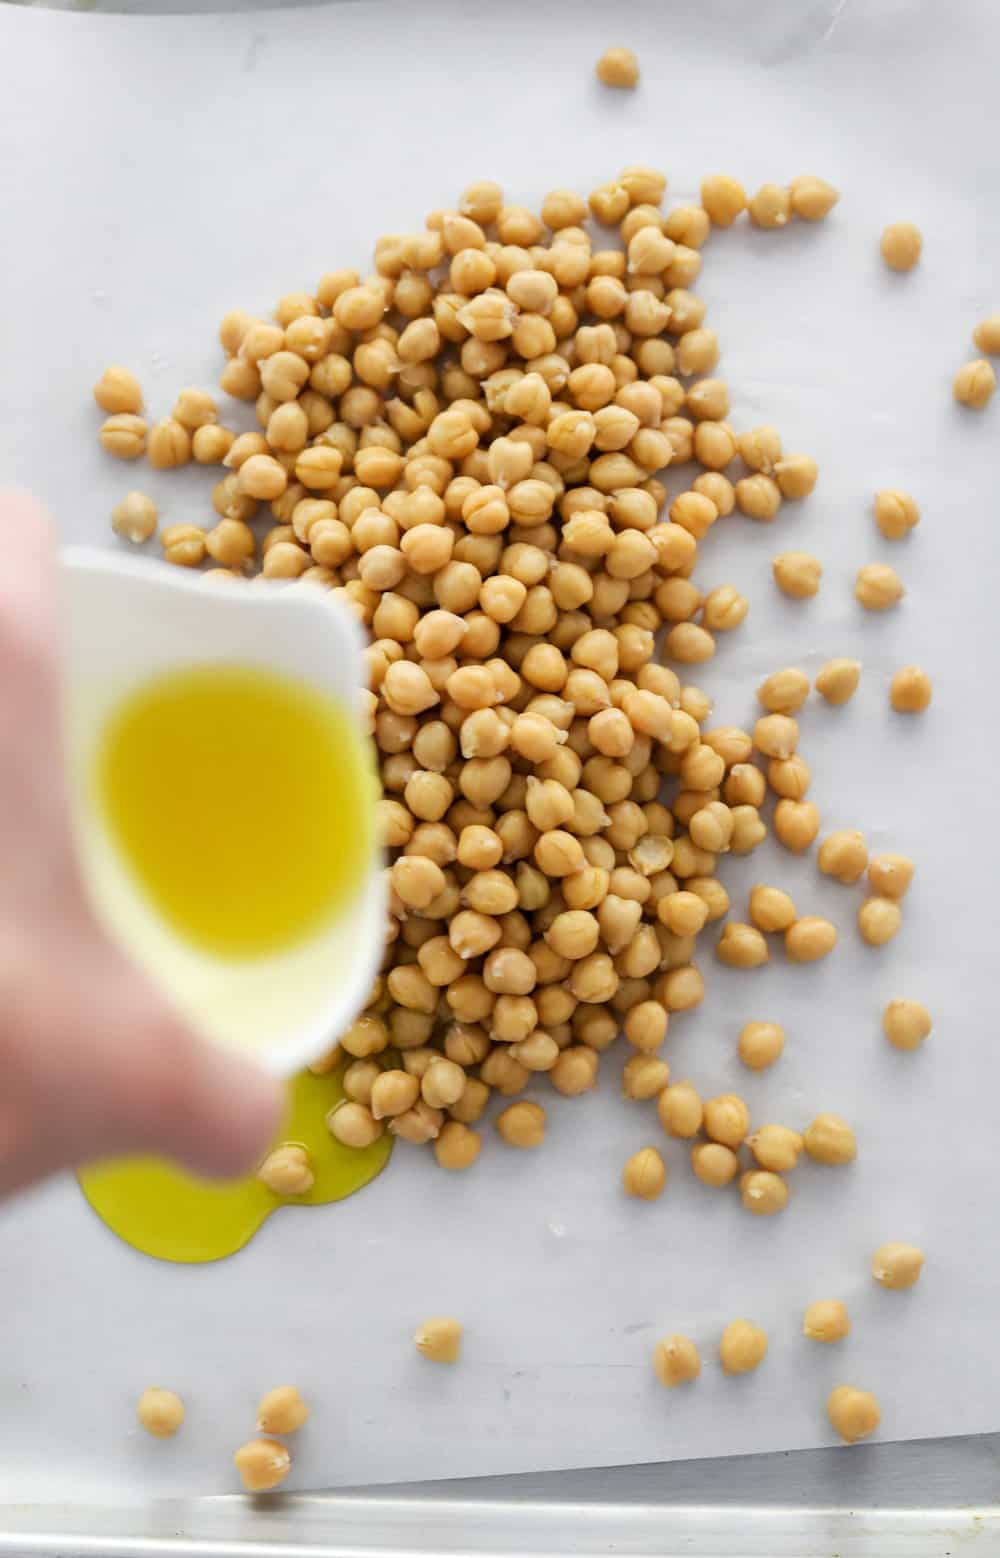 Hand pouring olive oil over chickpeas on a baking sheet